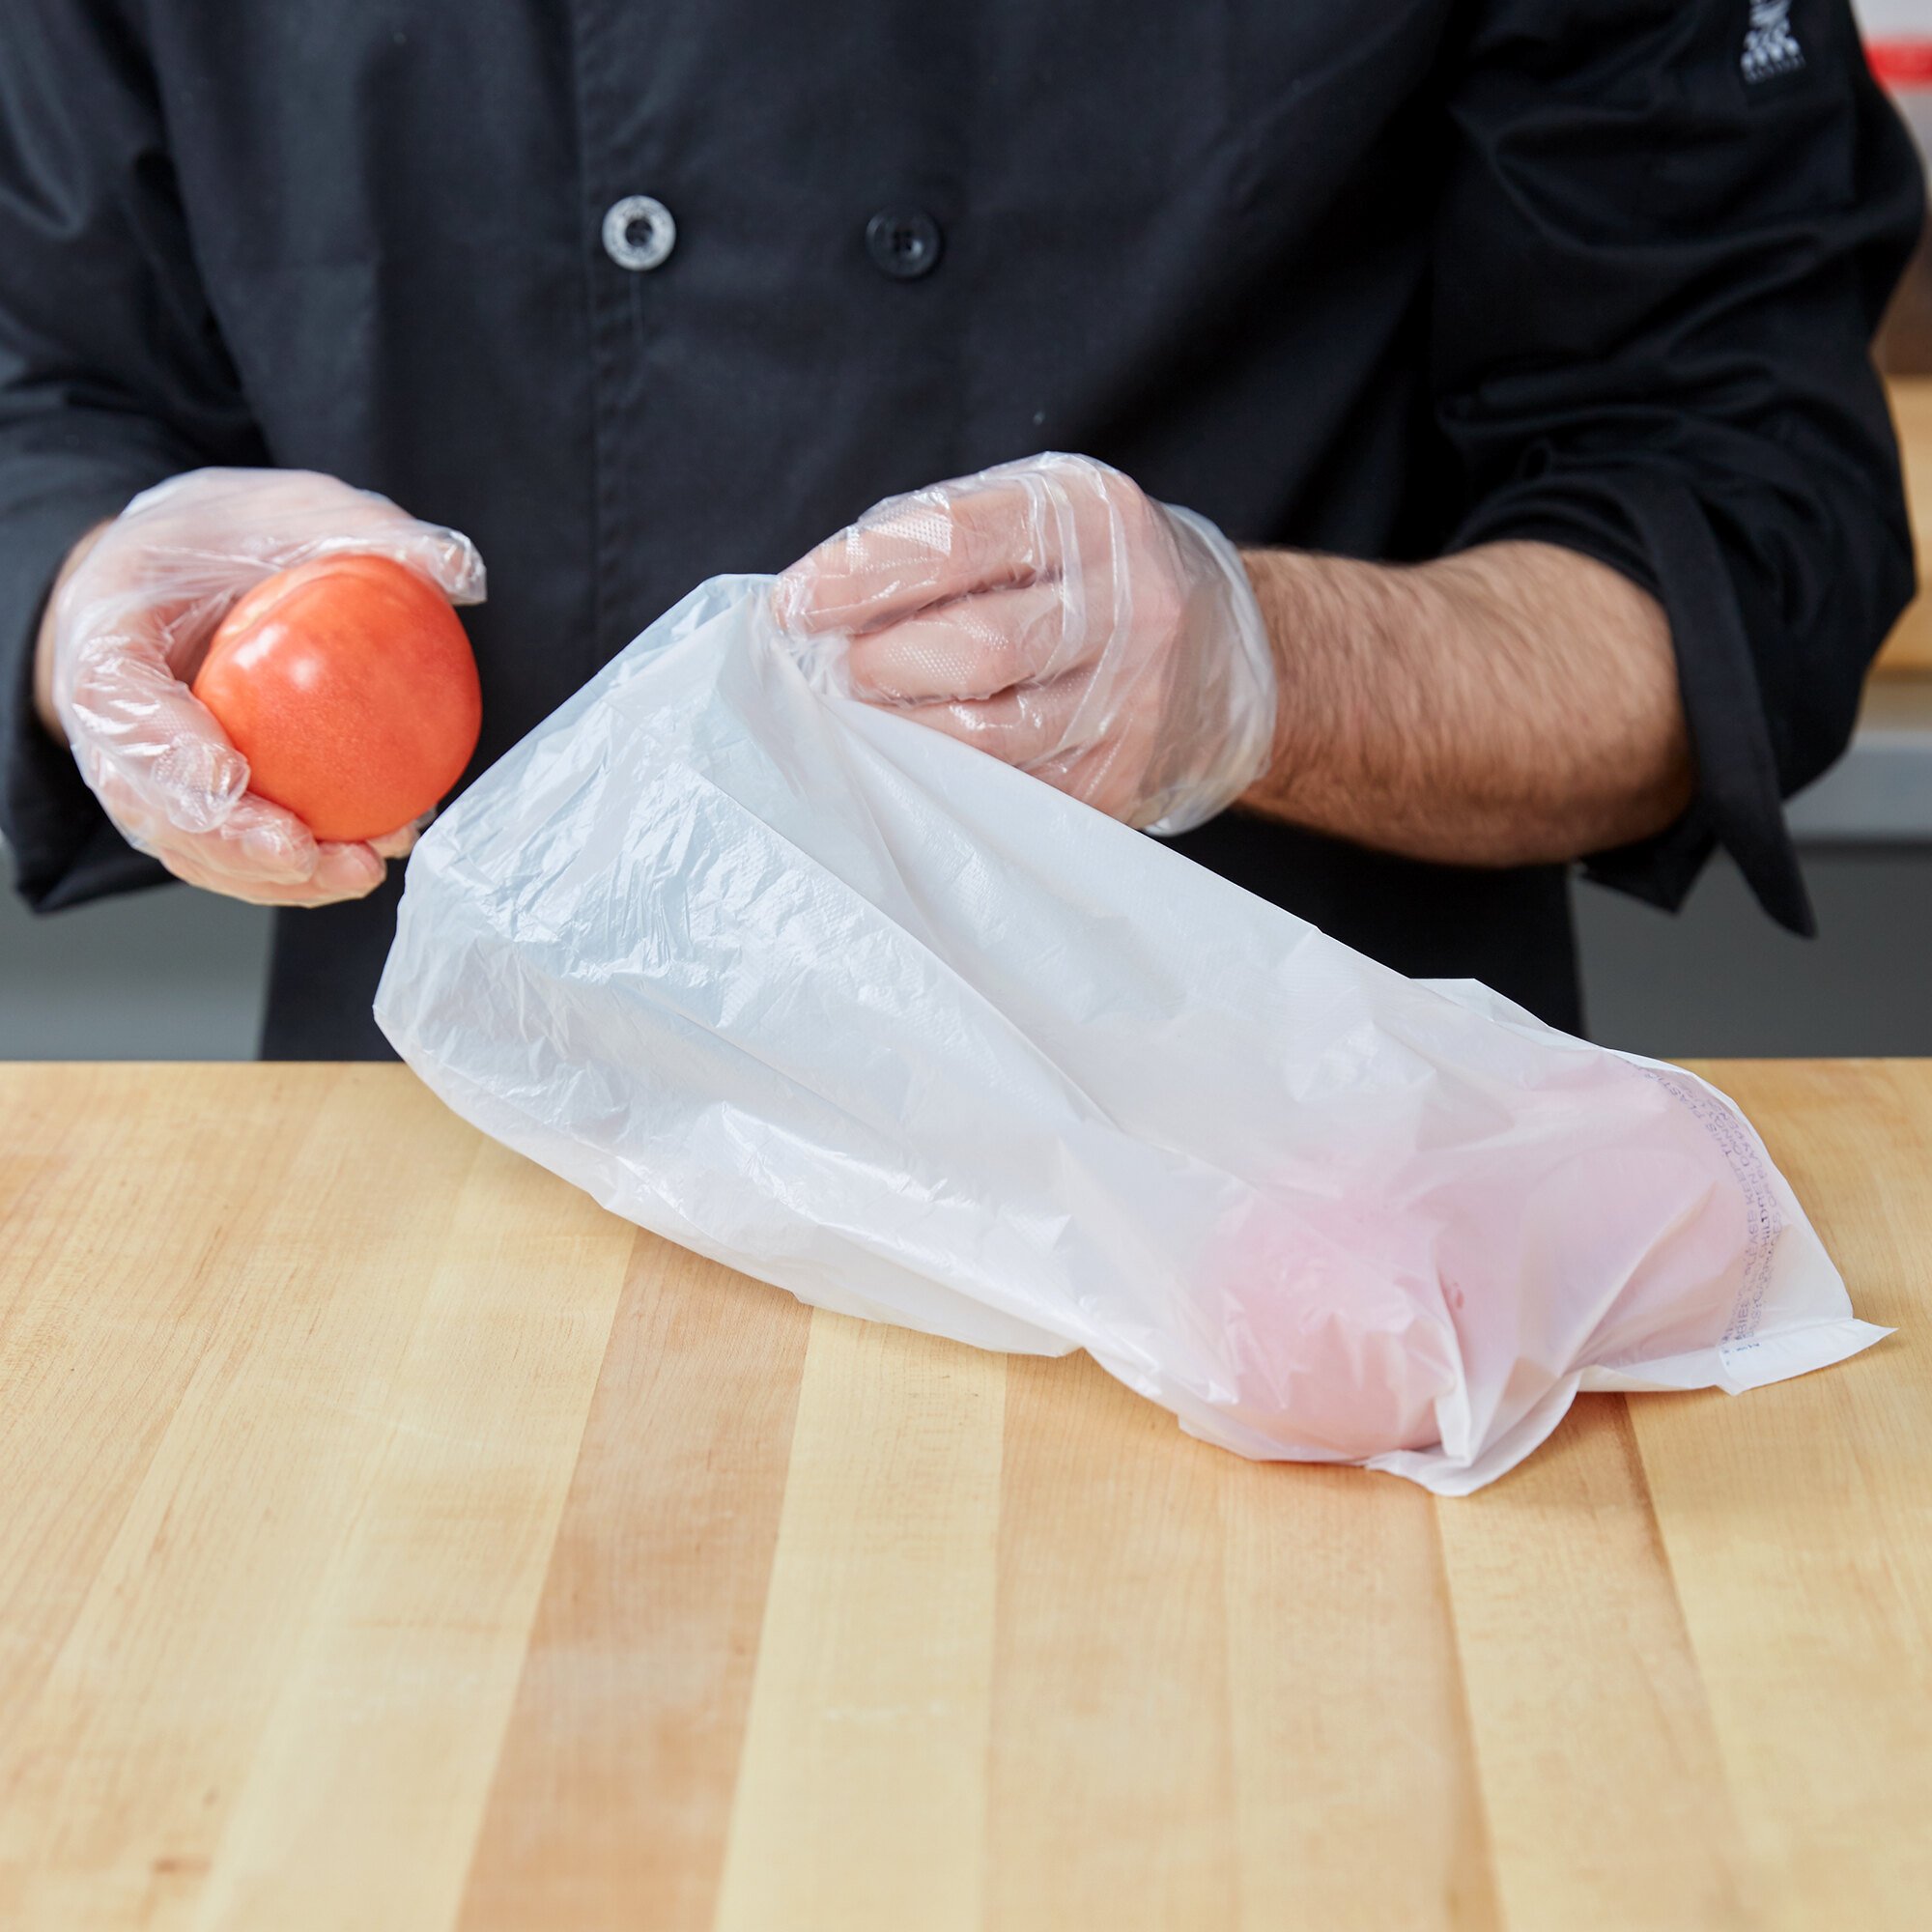 Chef placing tomatoes in white HDPE plastic bag